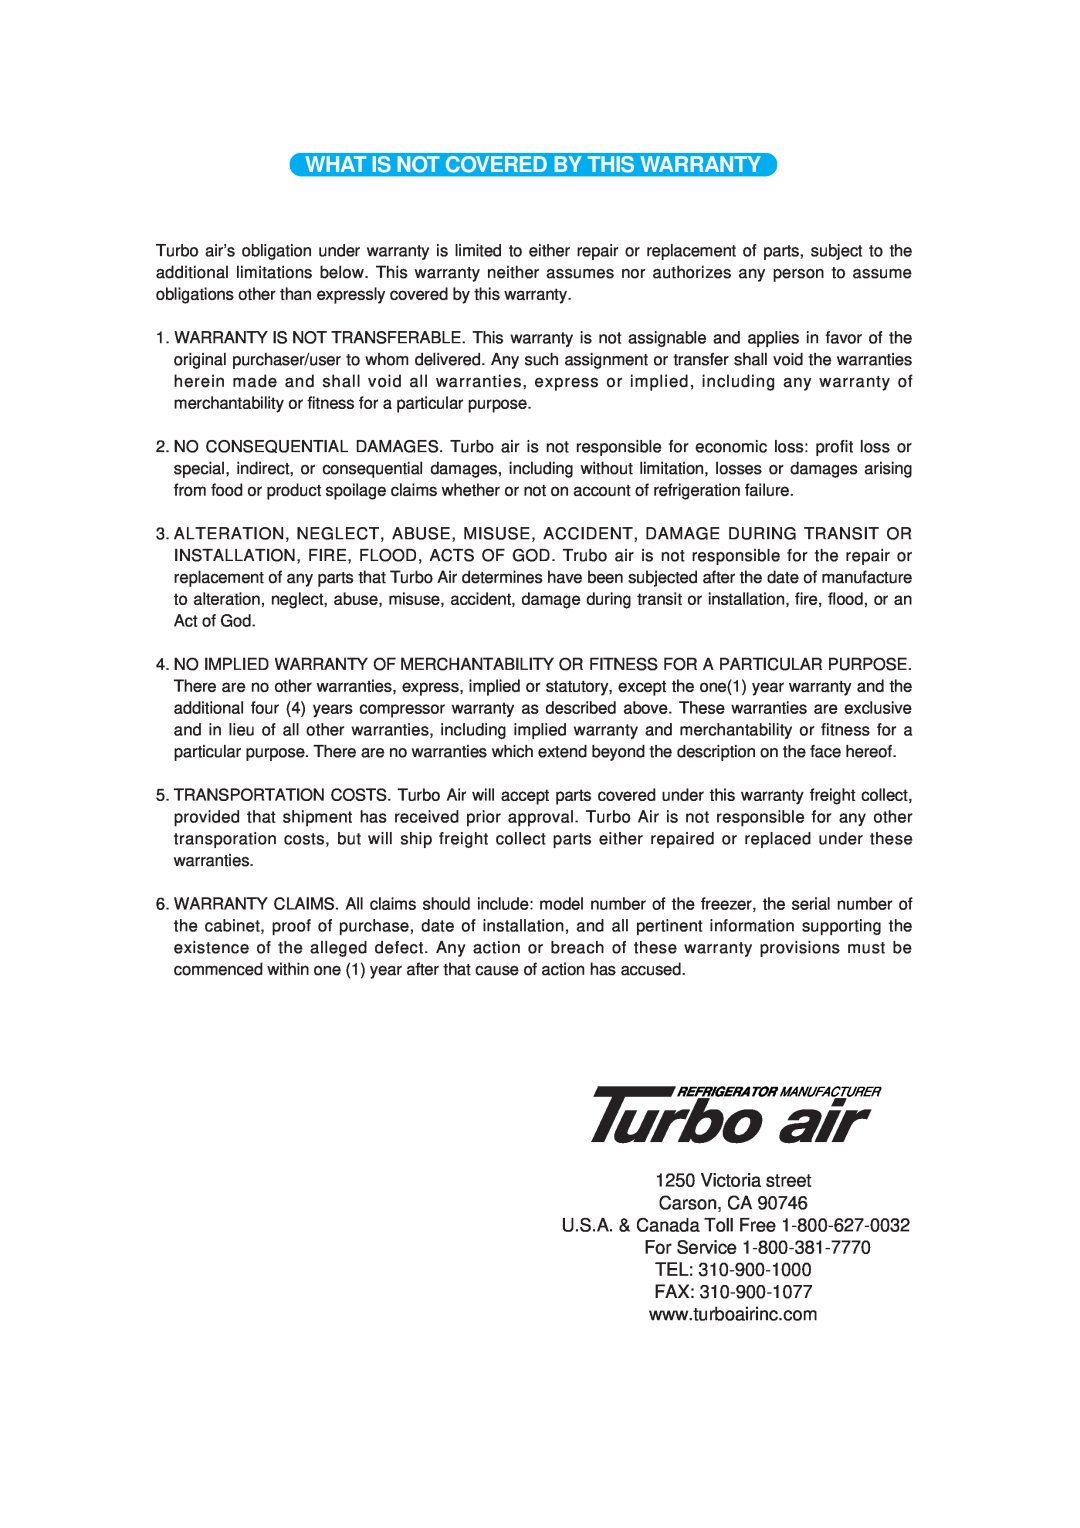 Turbo Air TGF-49F, TGF-23F, TGF-72F operation manual What Is Not Covered By This Warranty, Victoria street Carson, CA 